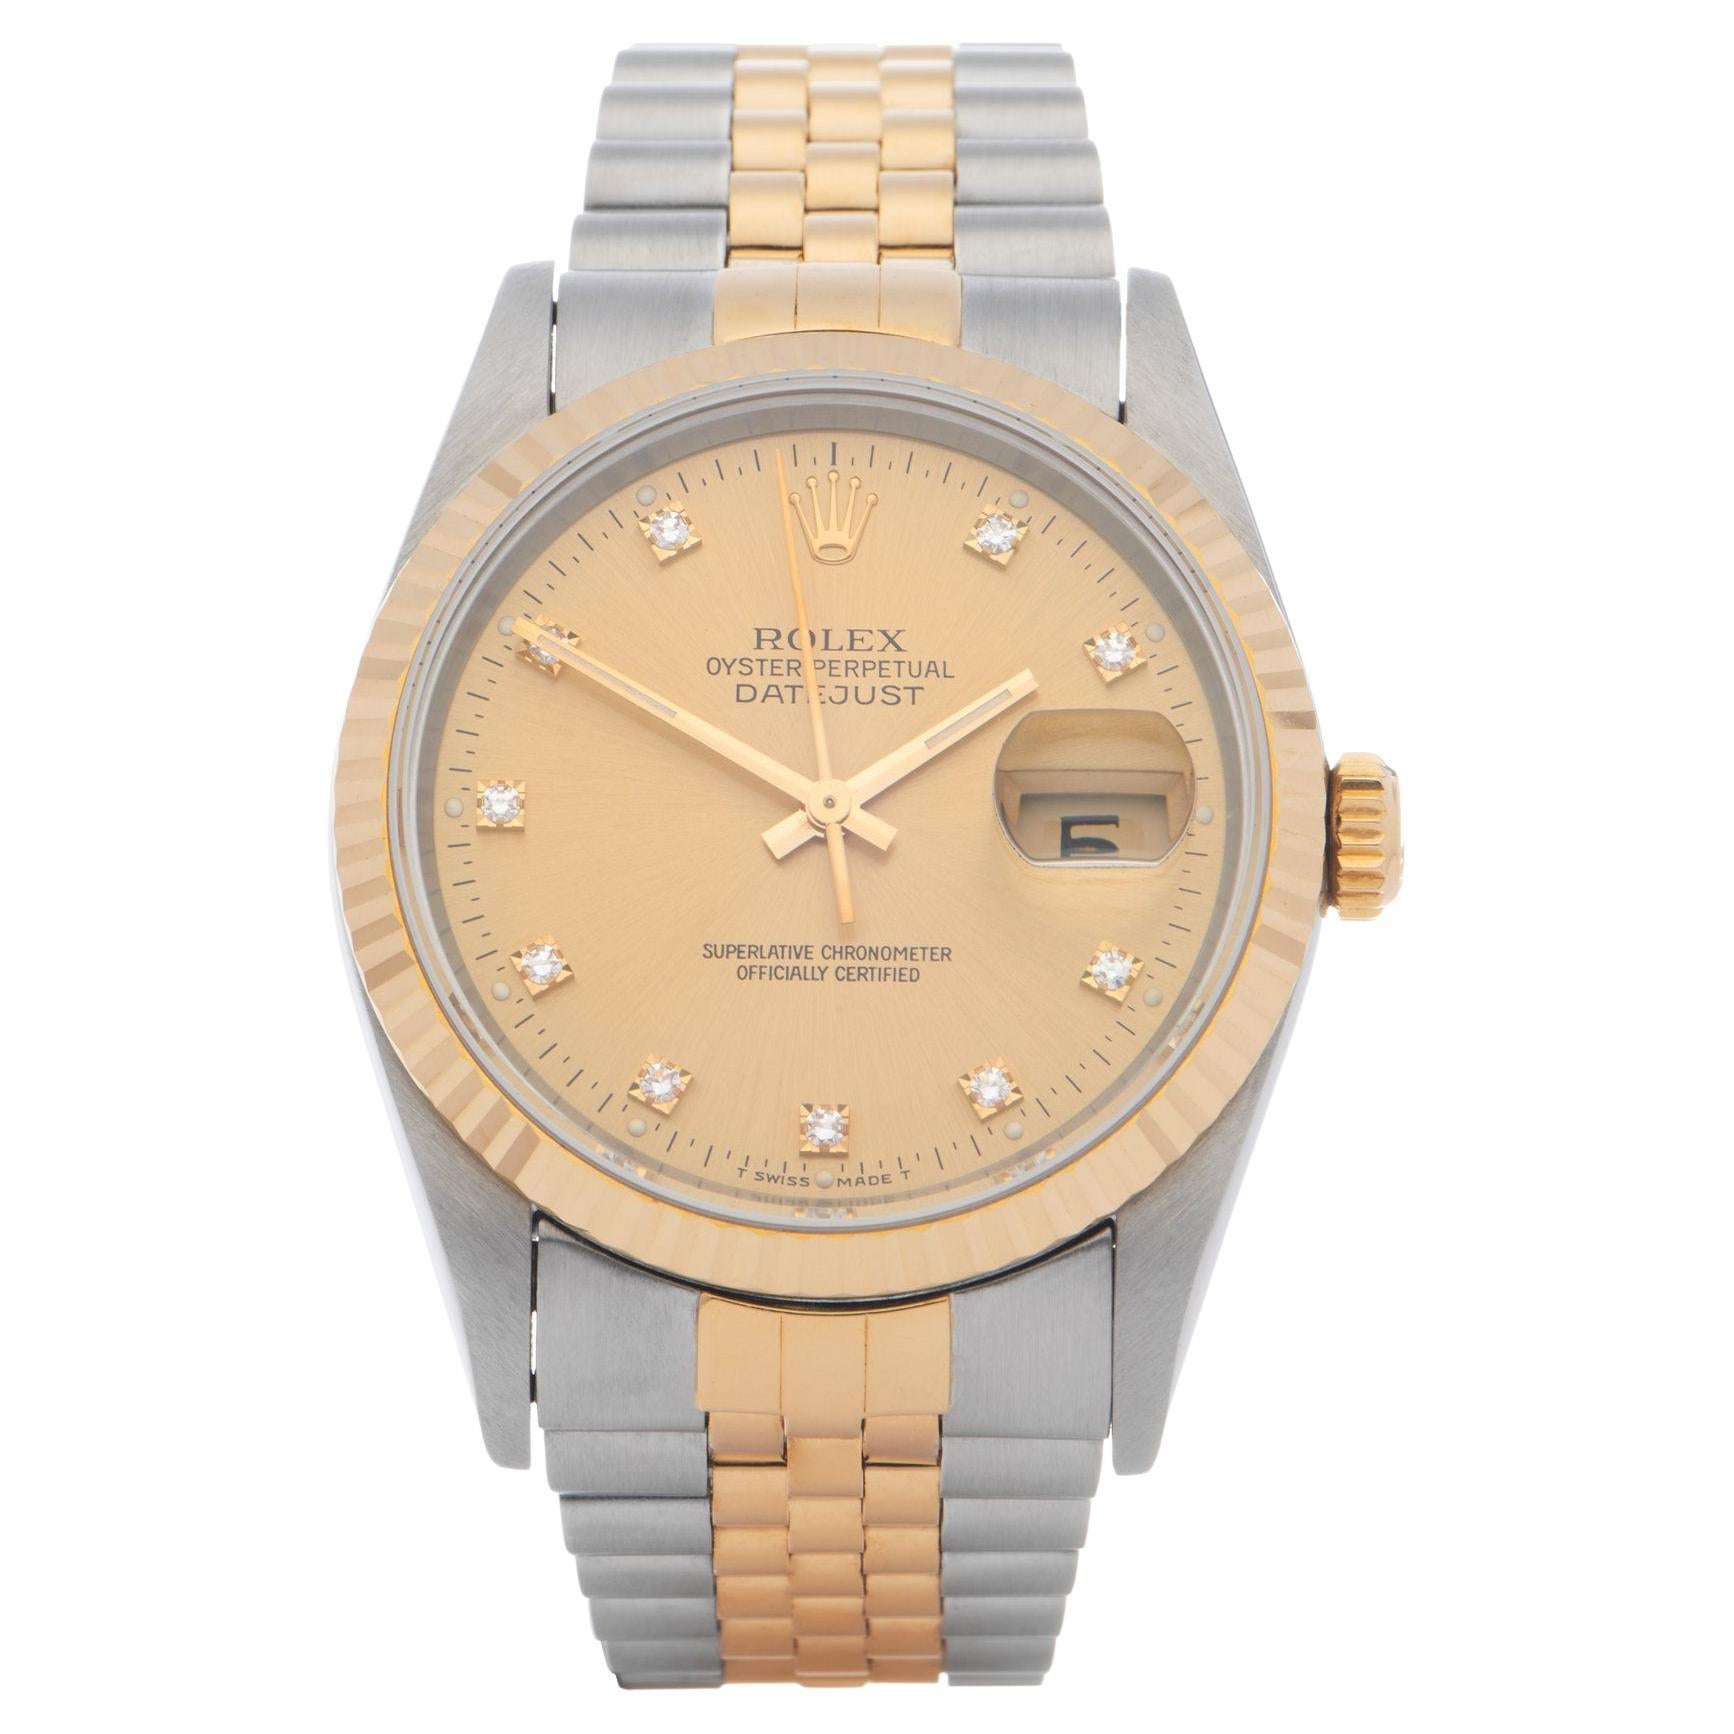 1997 Rolex Datejust Steel and Yellow Gold 16233 Wristwatch at 1stDibs